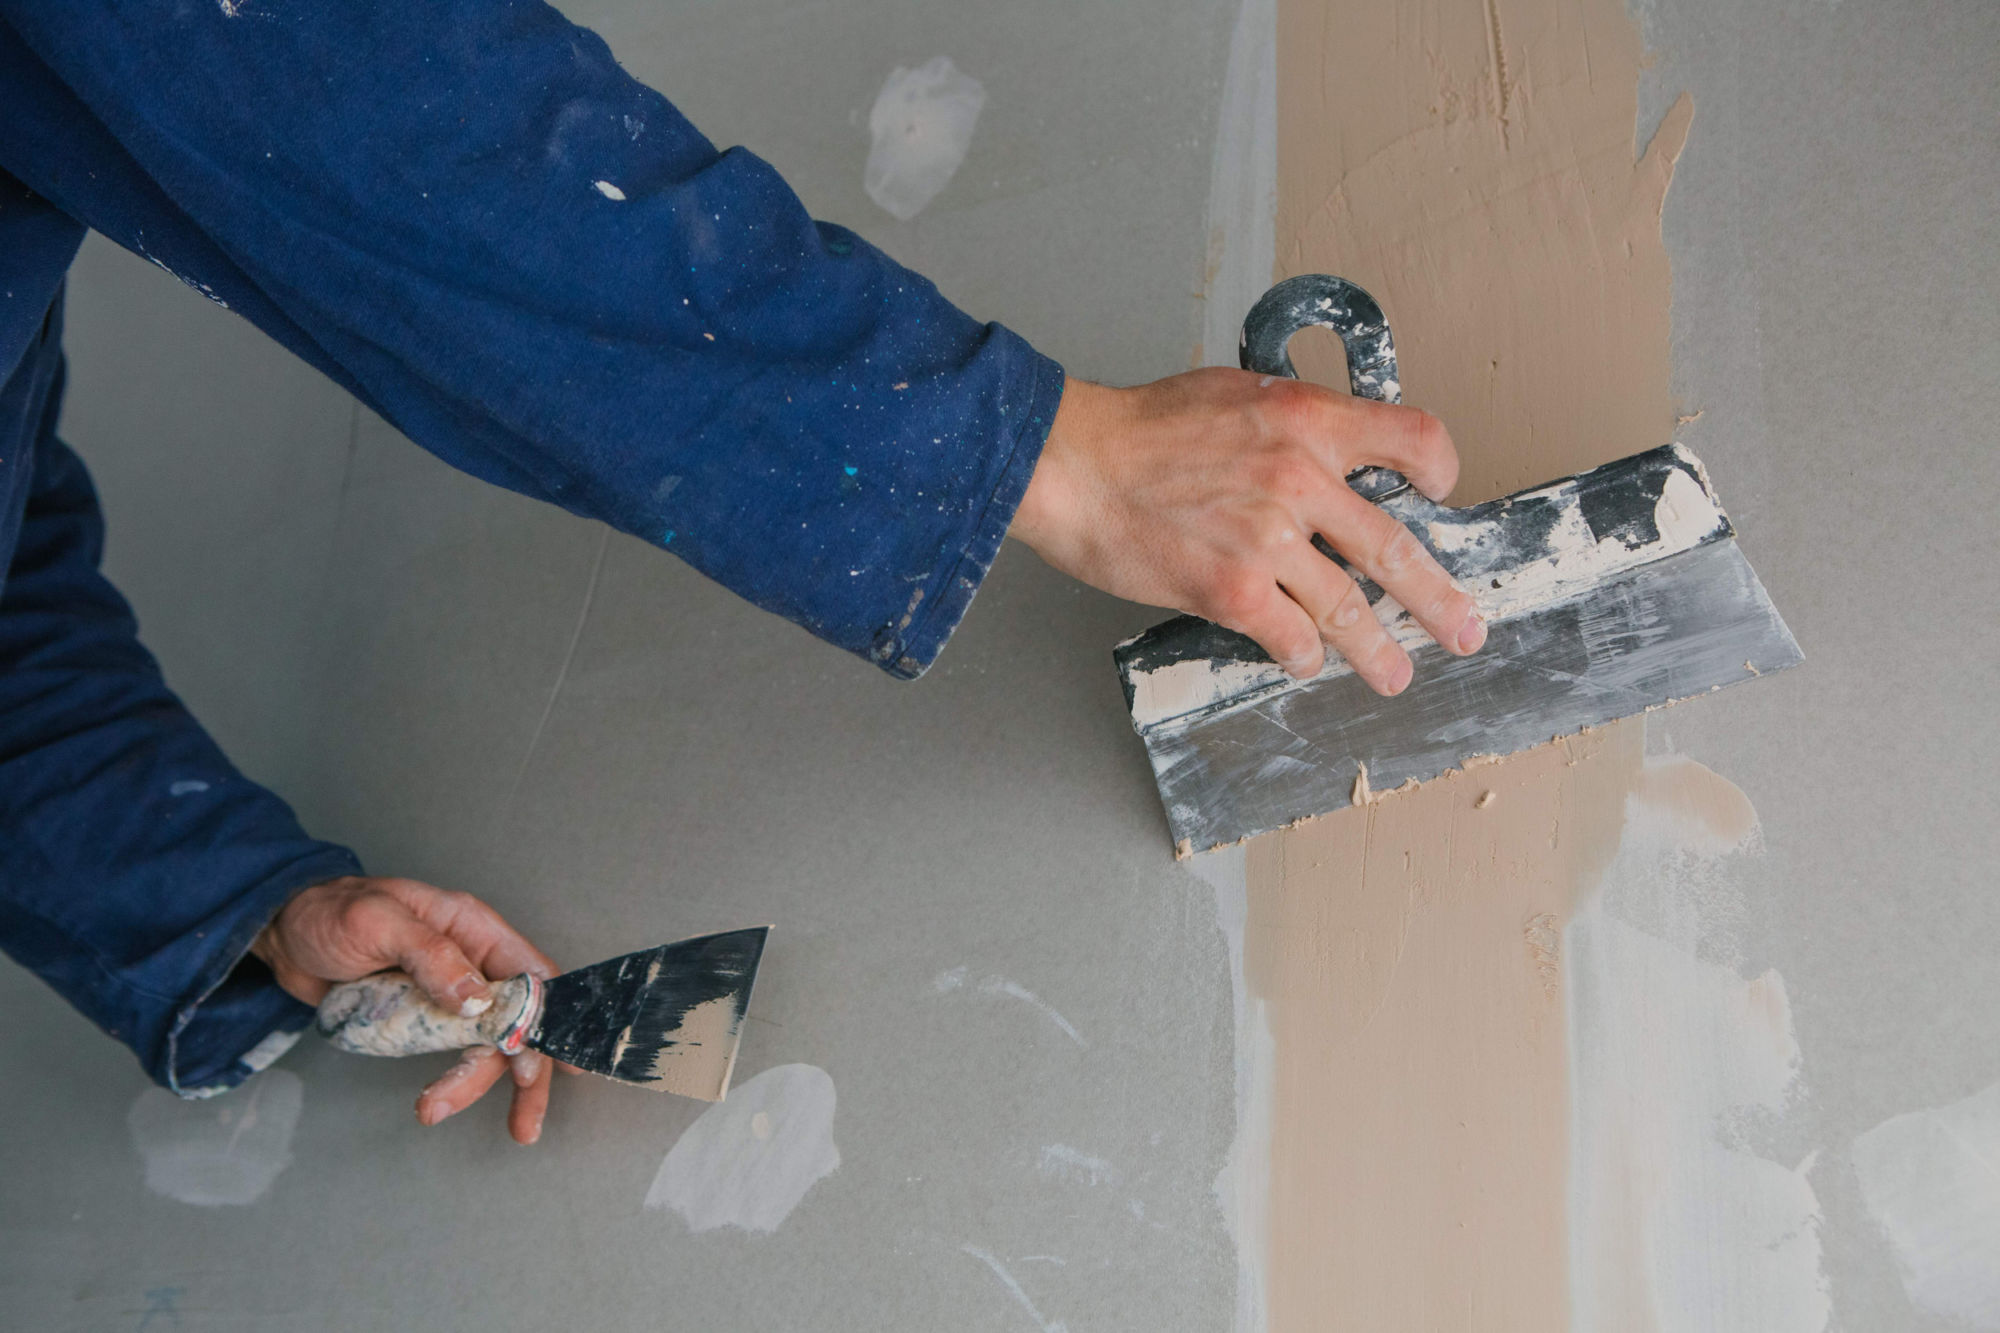 How to Mix Plaster - Step by Step Guide